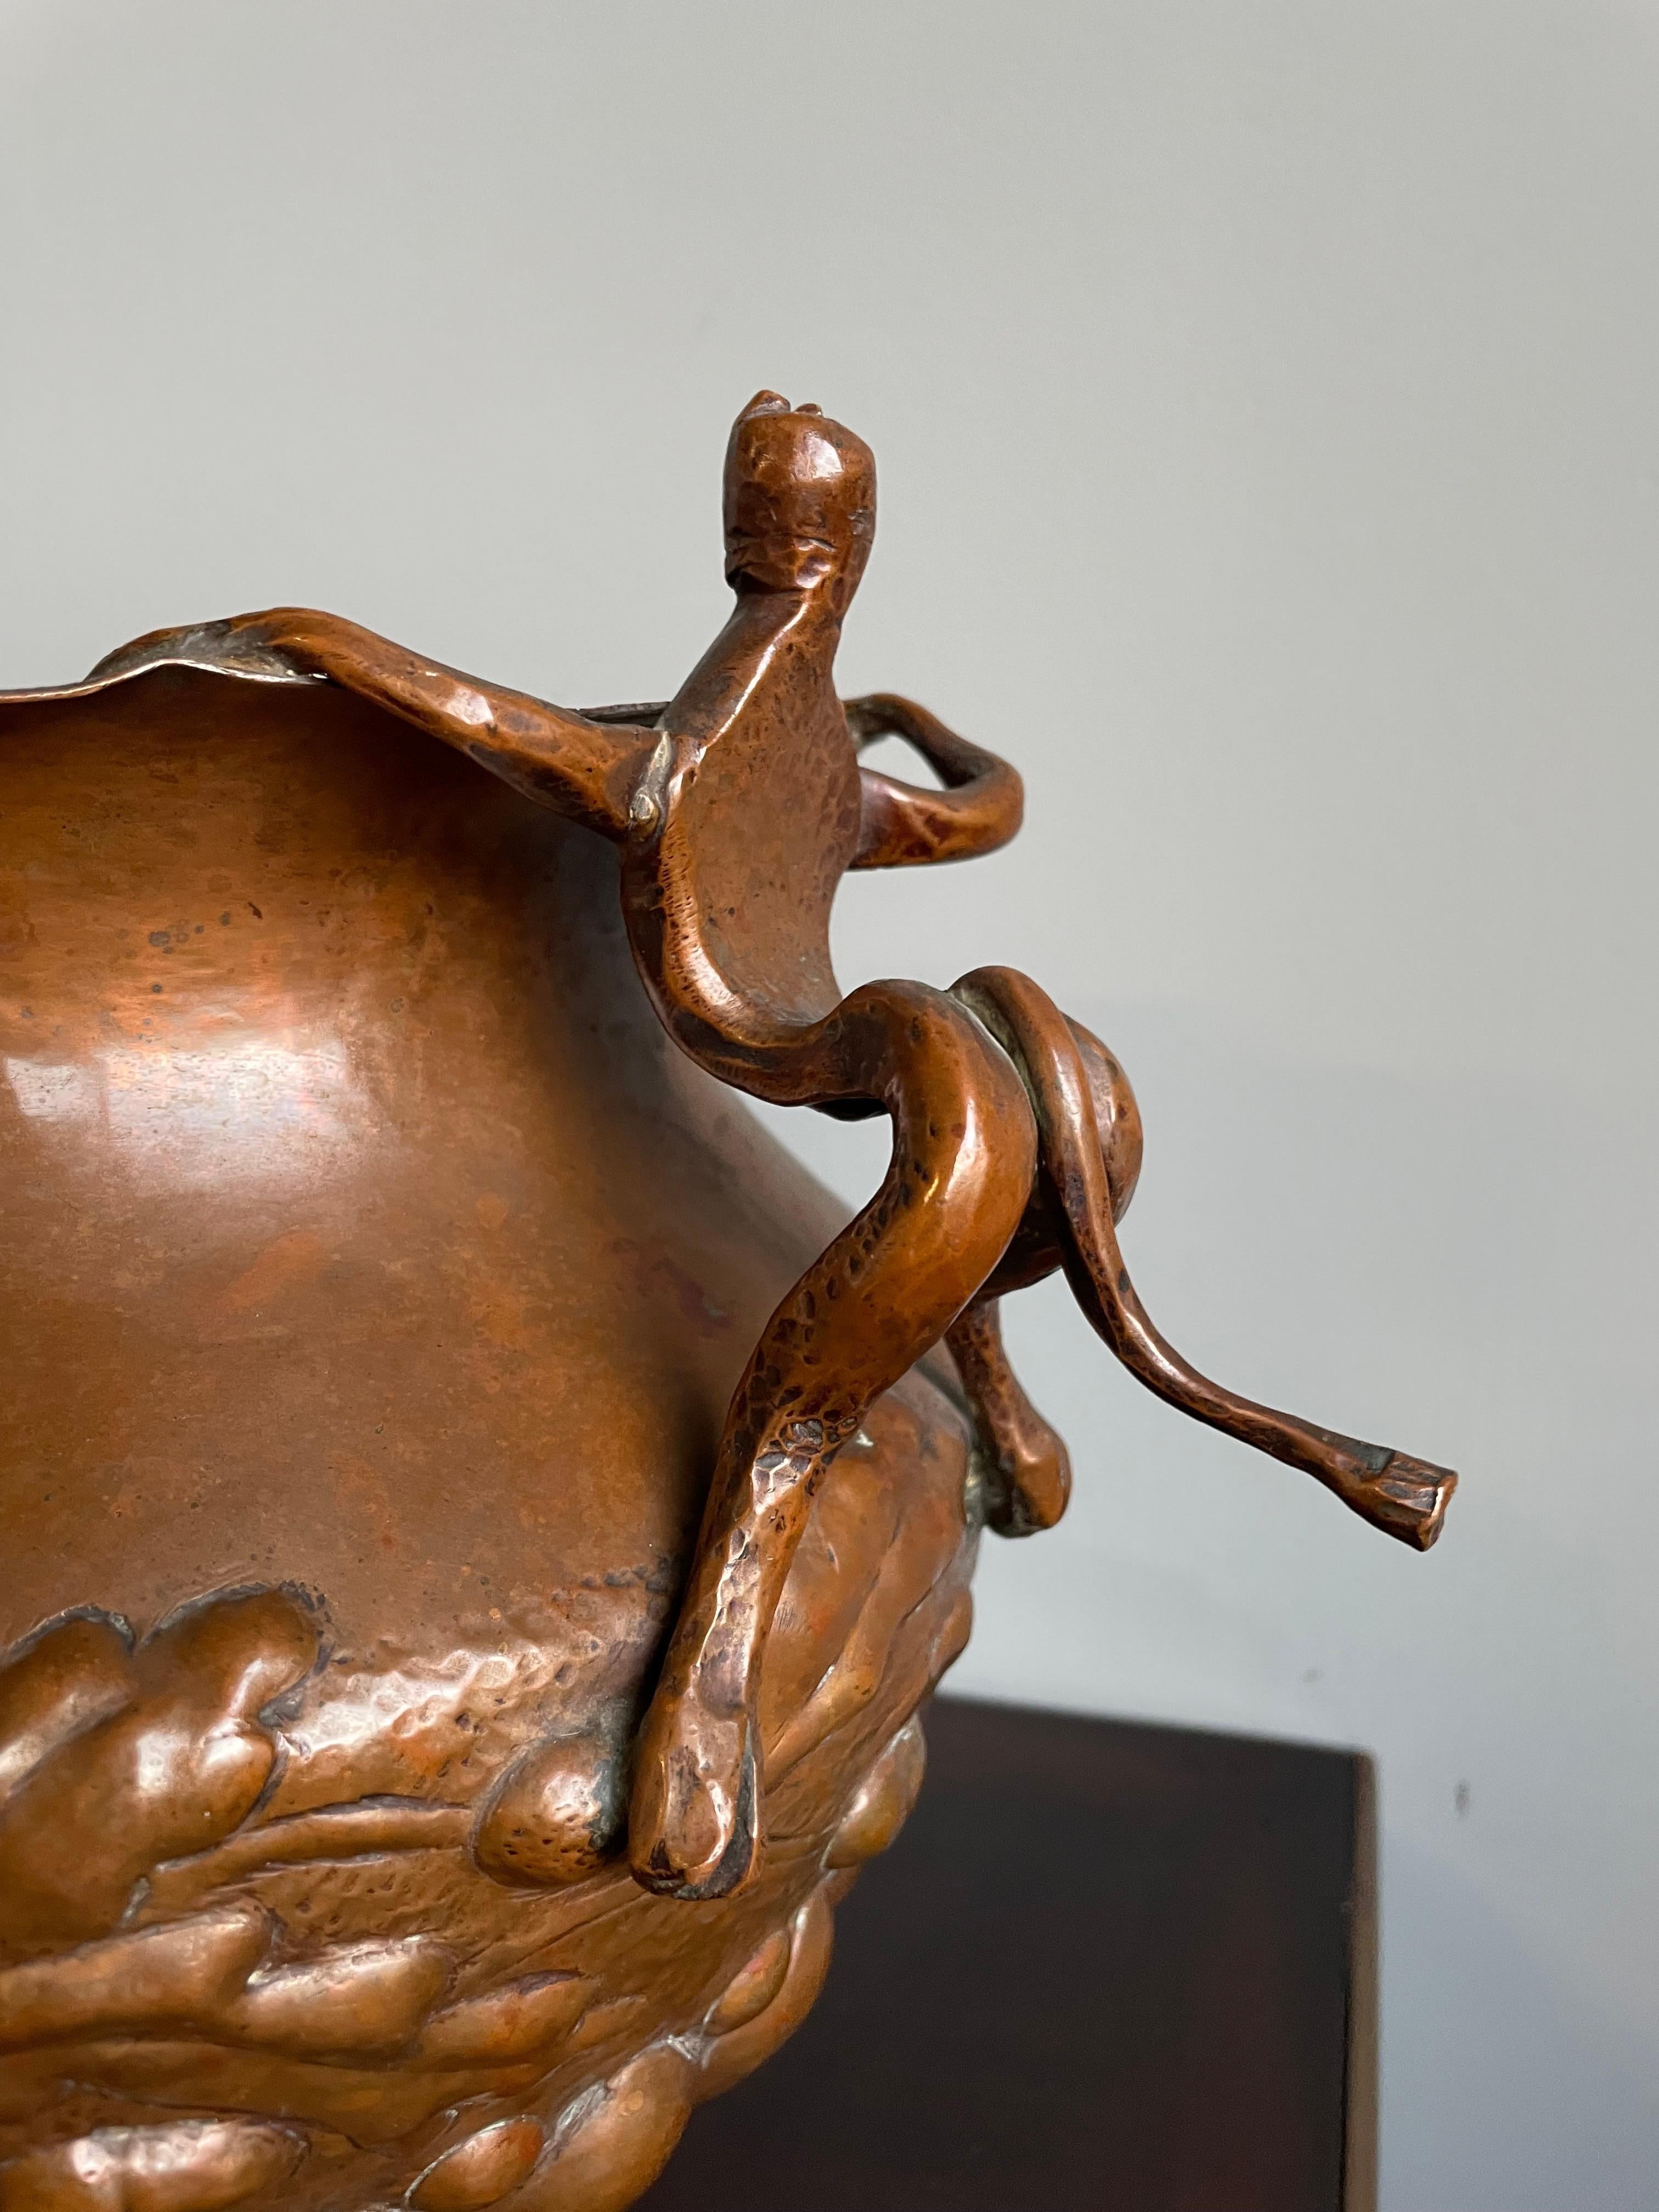 Unique Mid 1800s Embossed Copper Planter / Vase with Satyr Sculptures as Handles For Sale 7